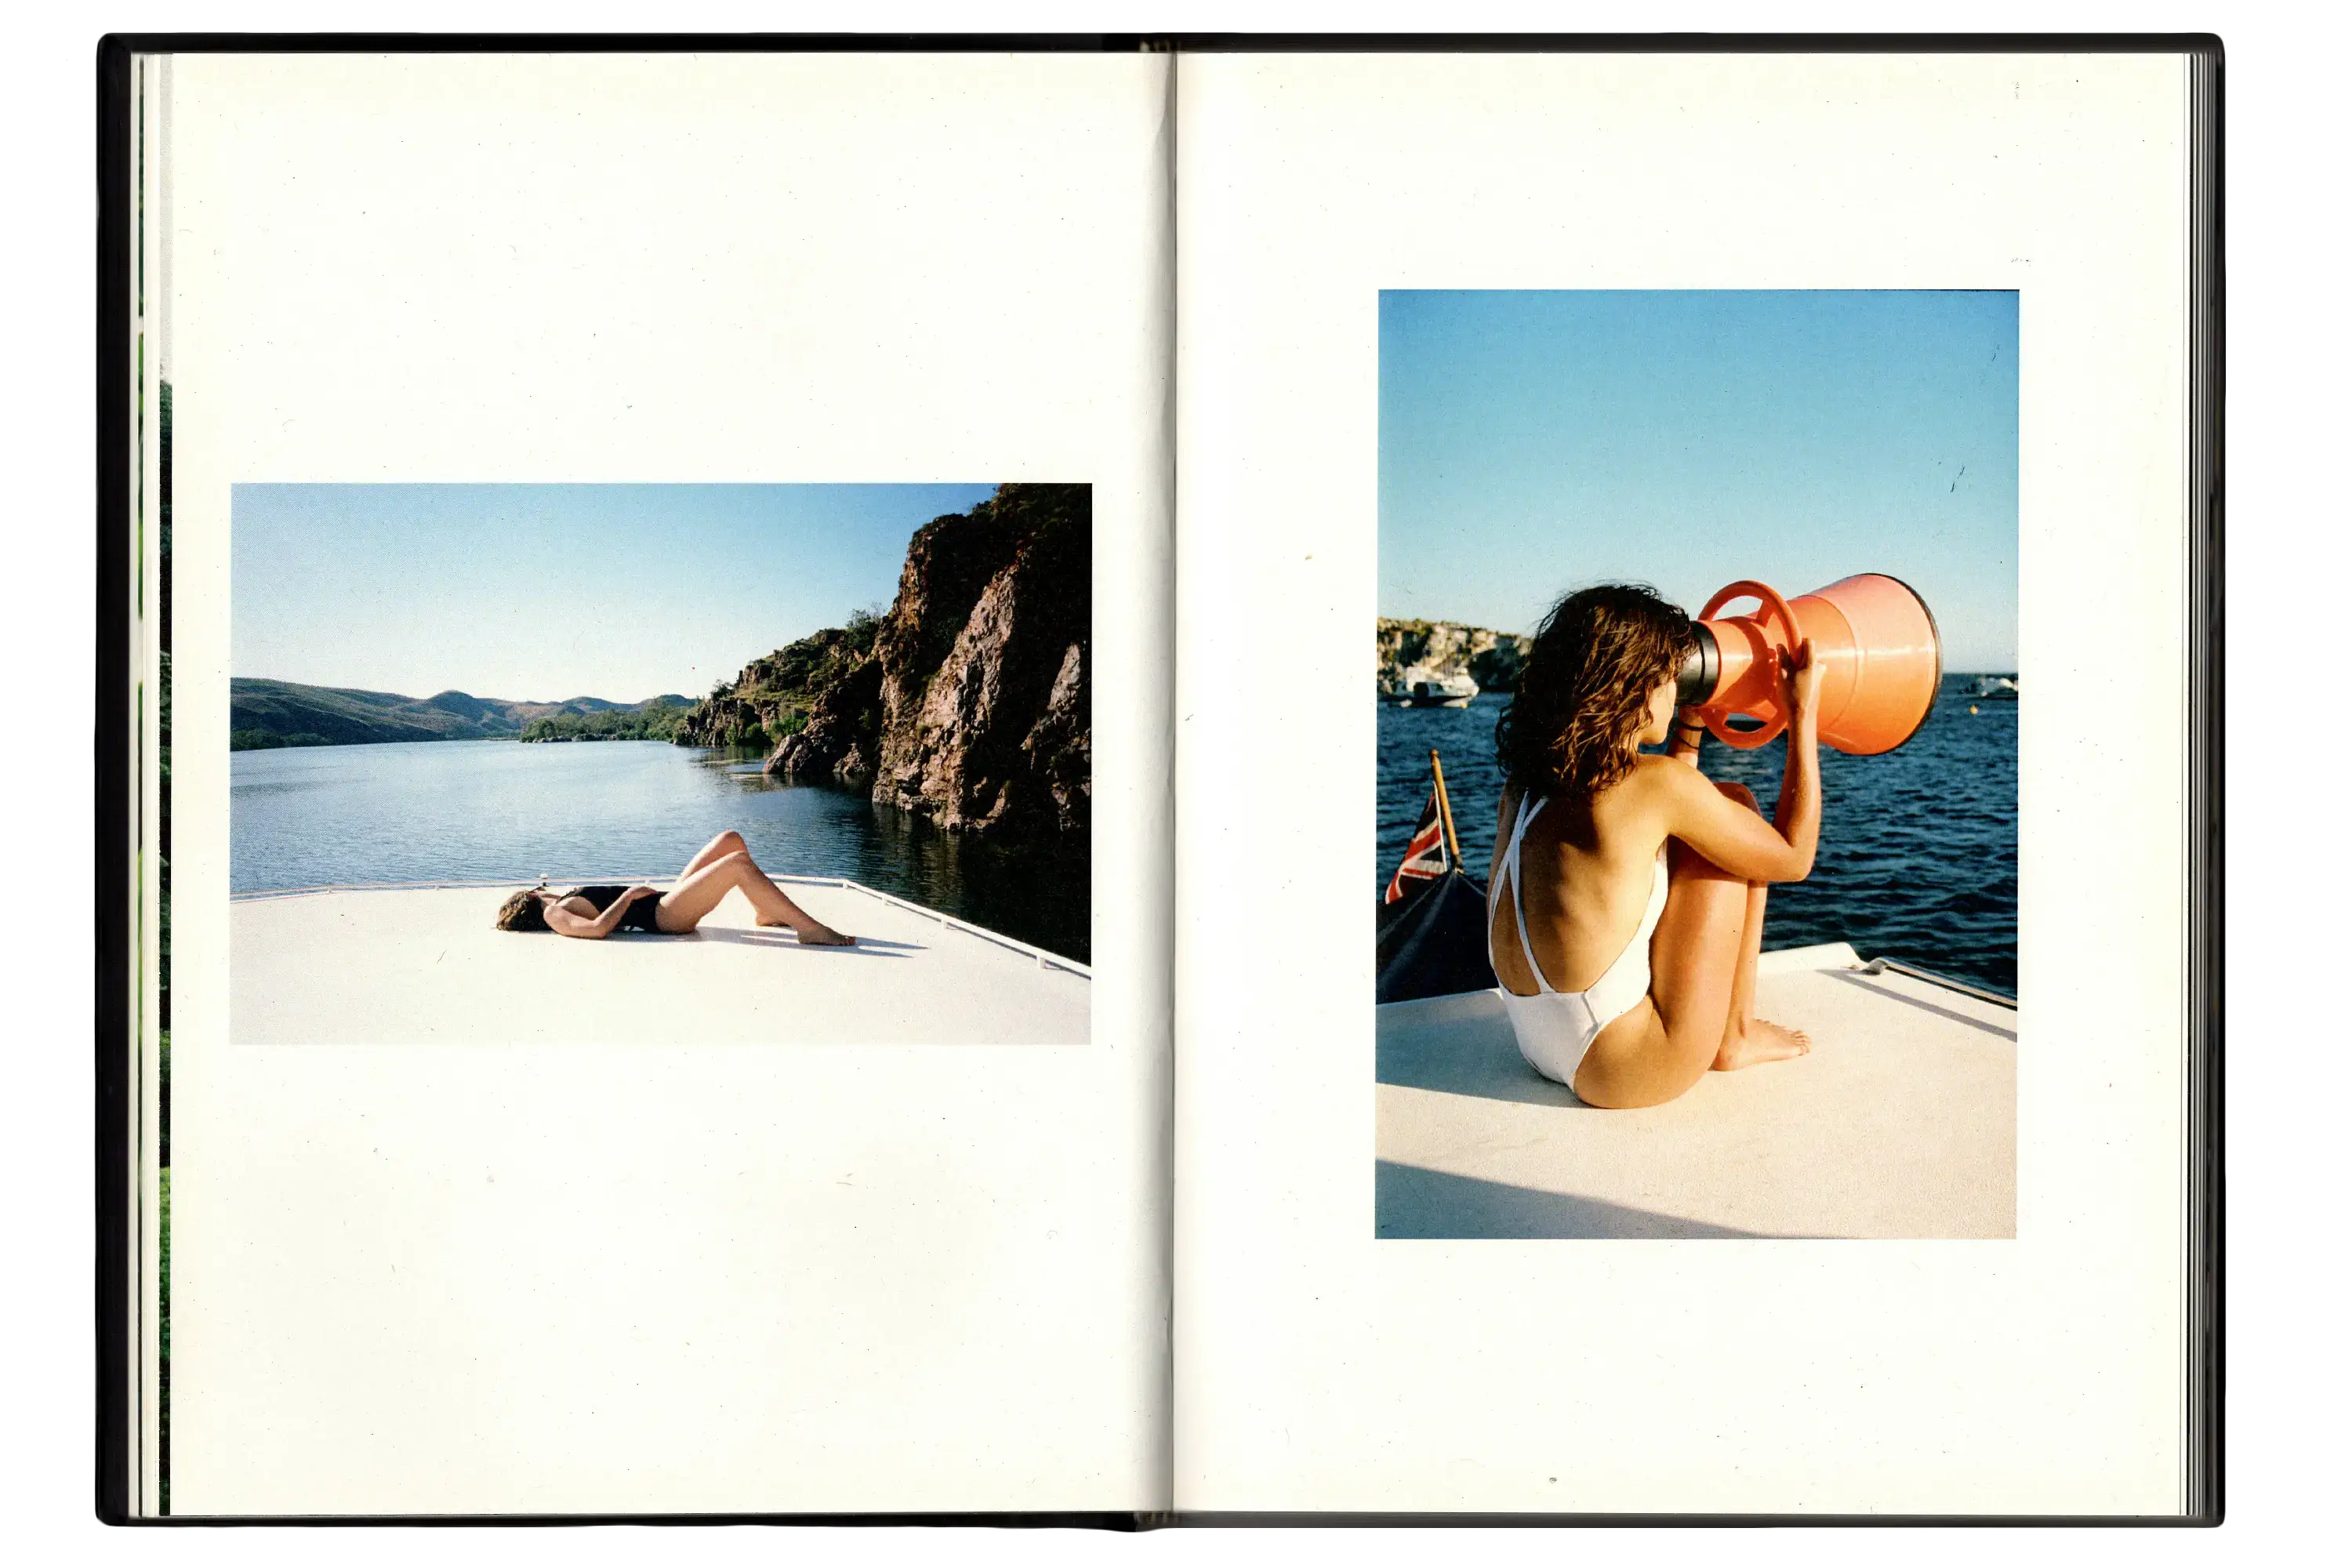 Imperfect Photo Book - left page image of woman laying on boat with water and mountains in the distance, right page image of woman looking through a large orange device while sitting on boat